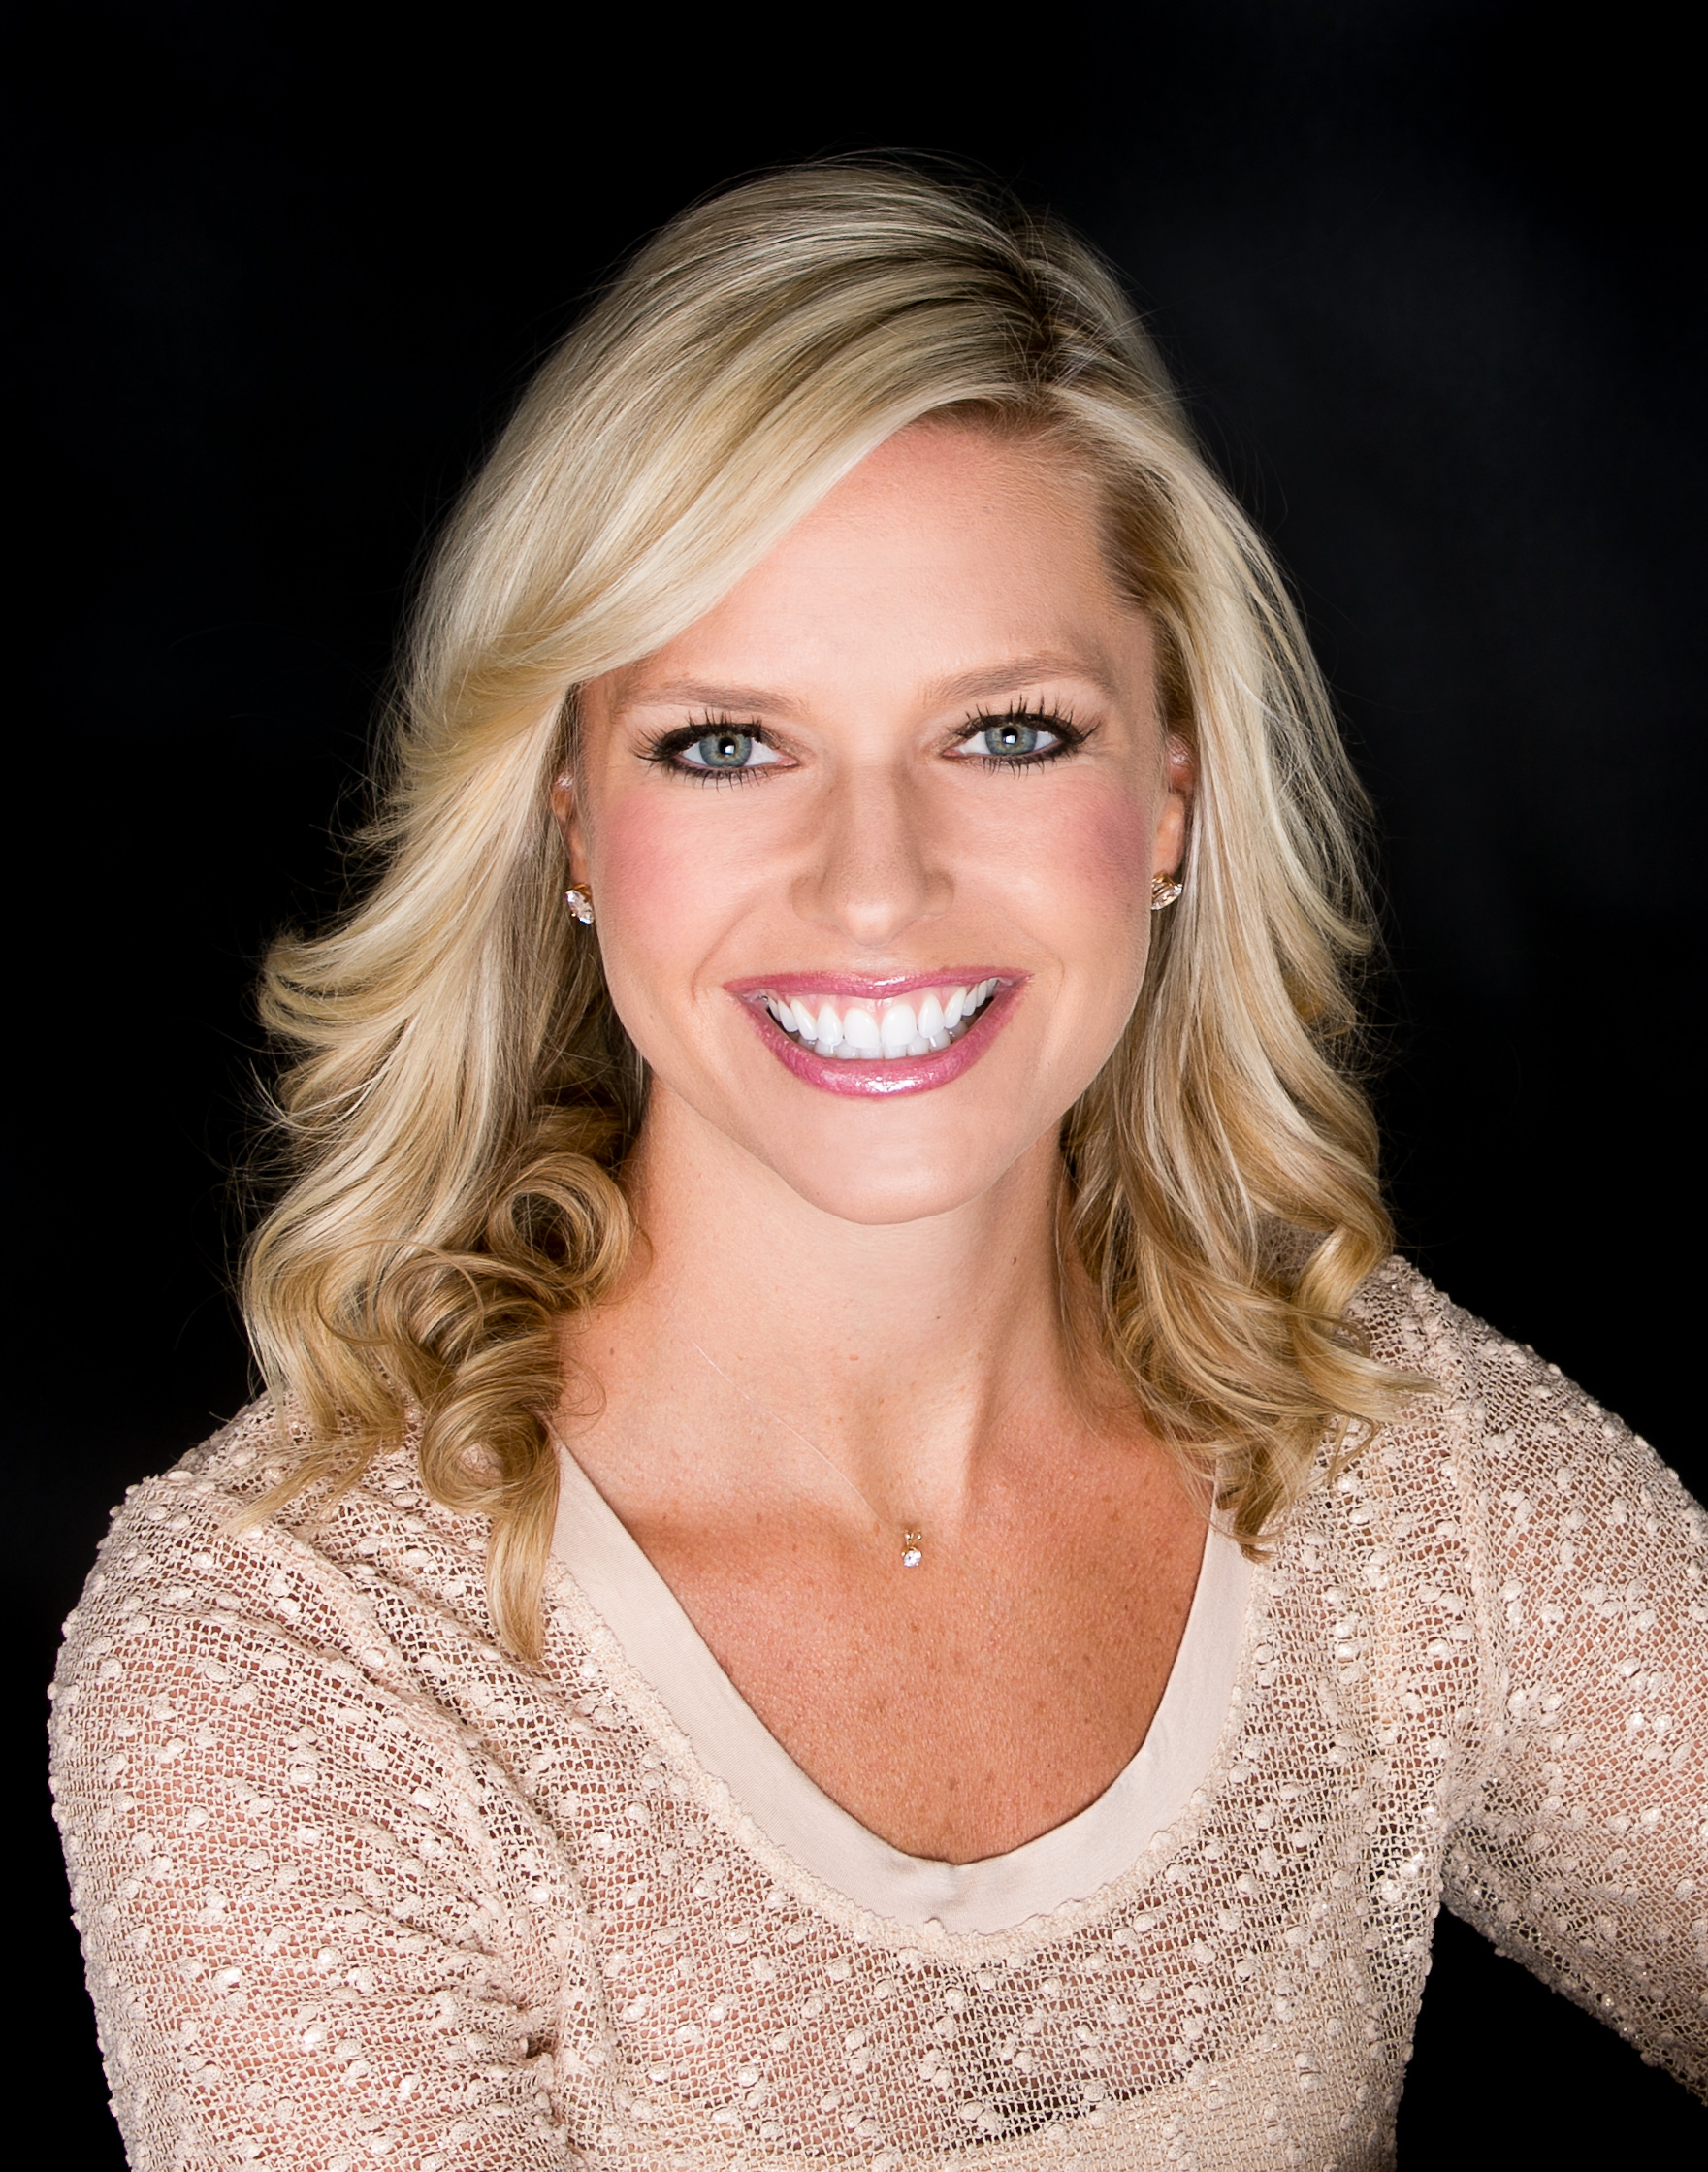 KATHRYN TAPPEN JOINS NBC SPORTS GROUP